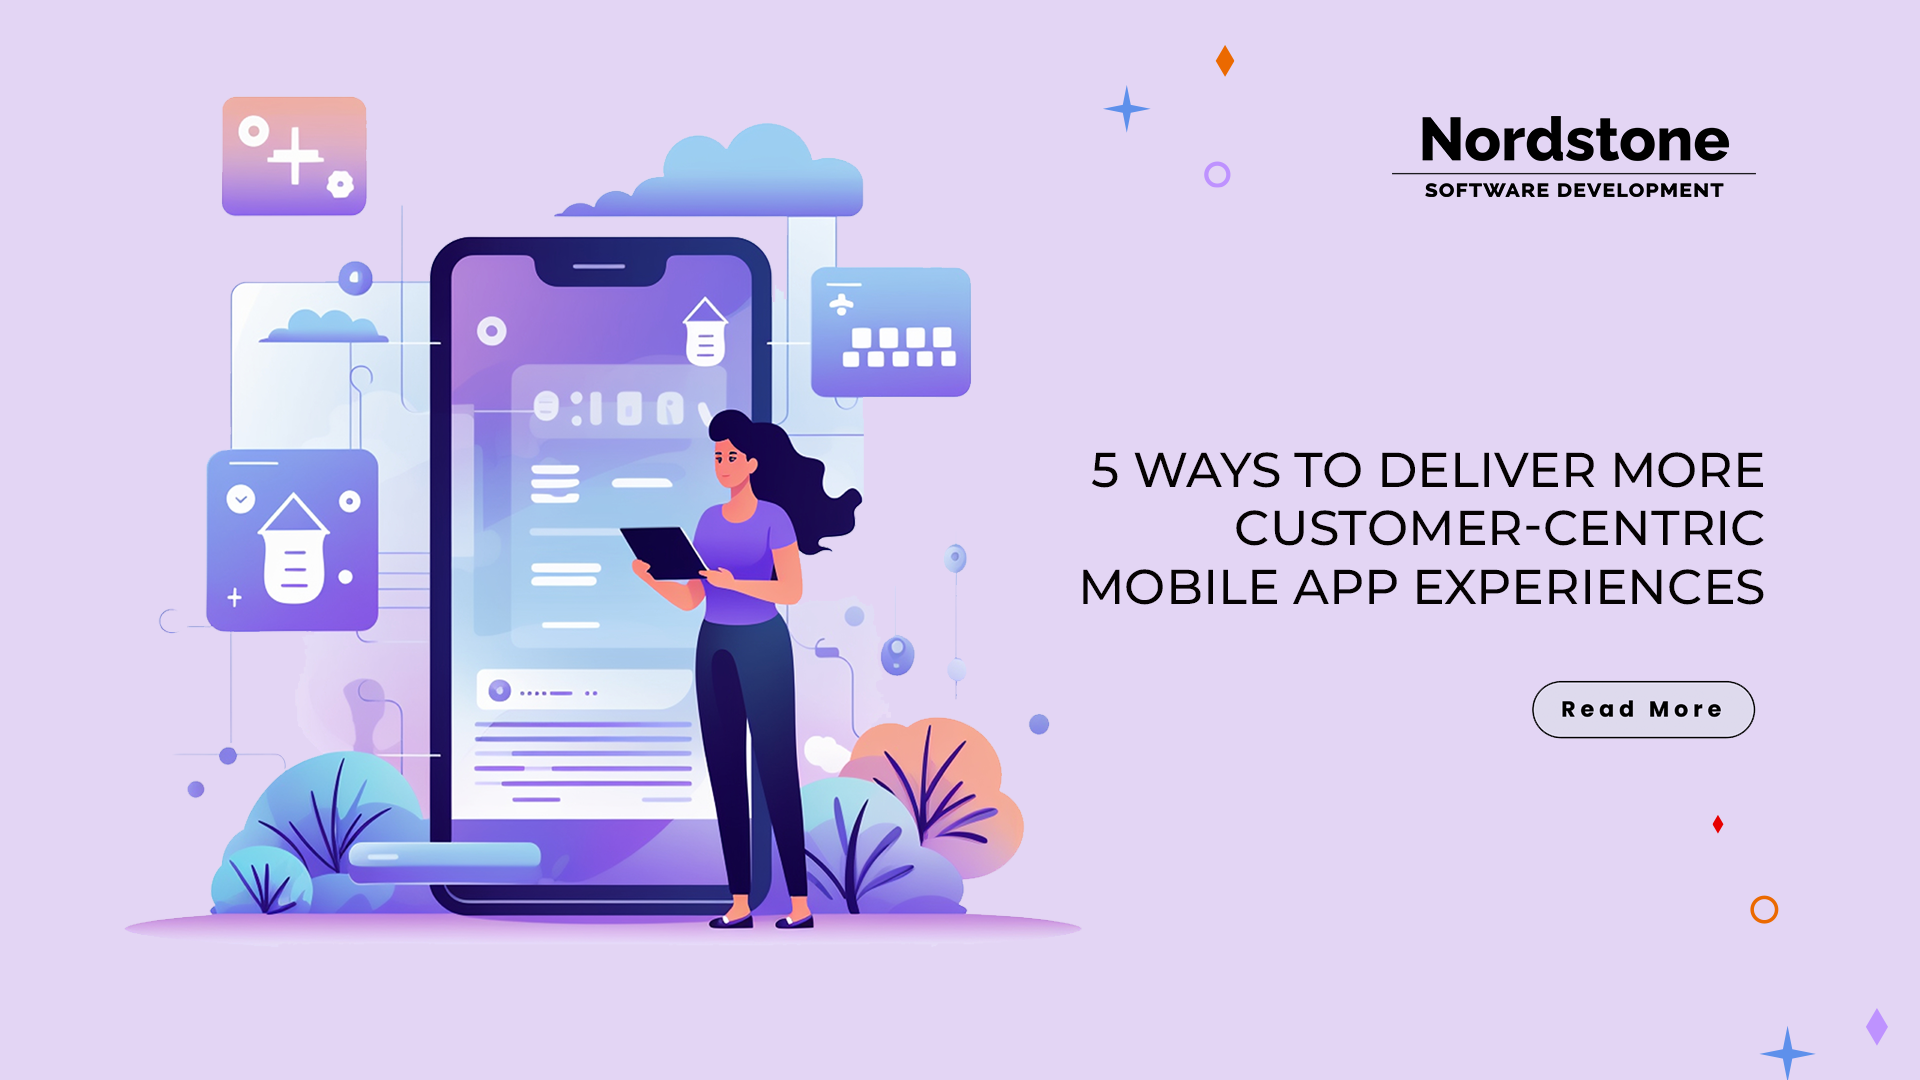 5 Ways to Deliver More Customer-Centric Mobile App Experiences